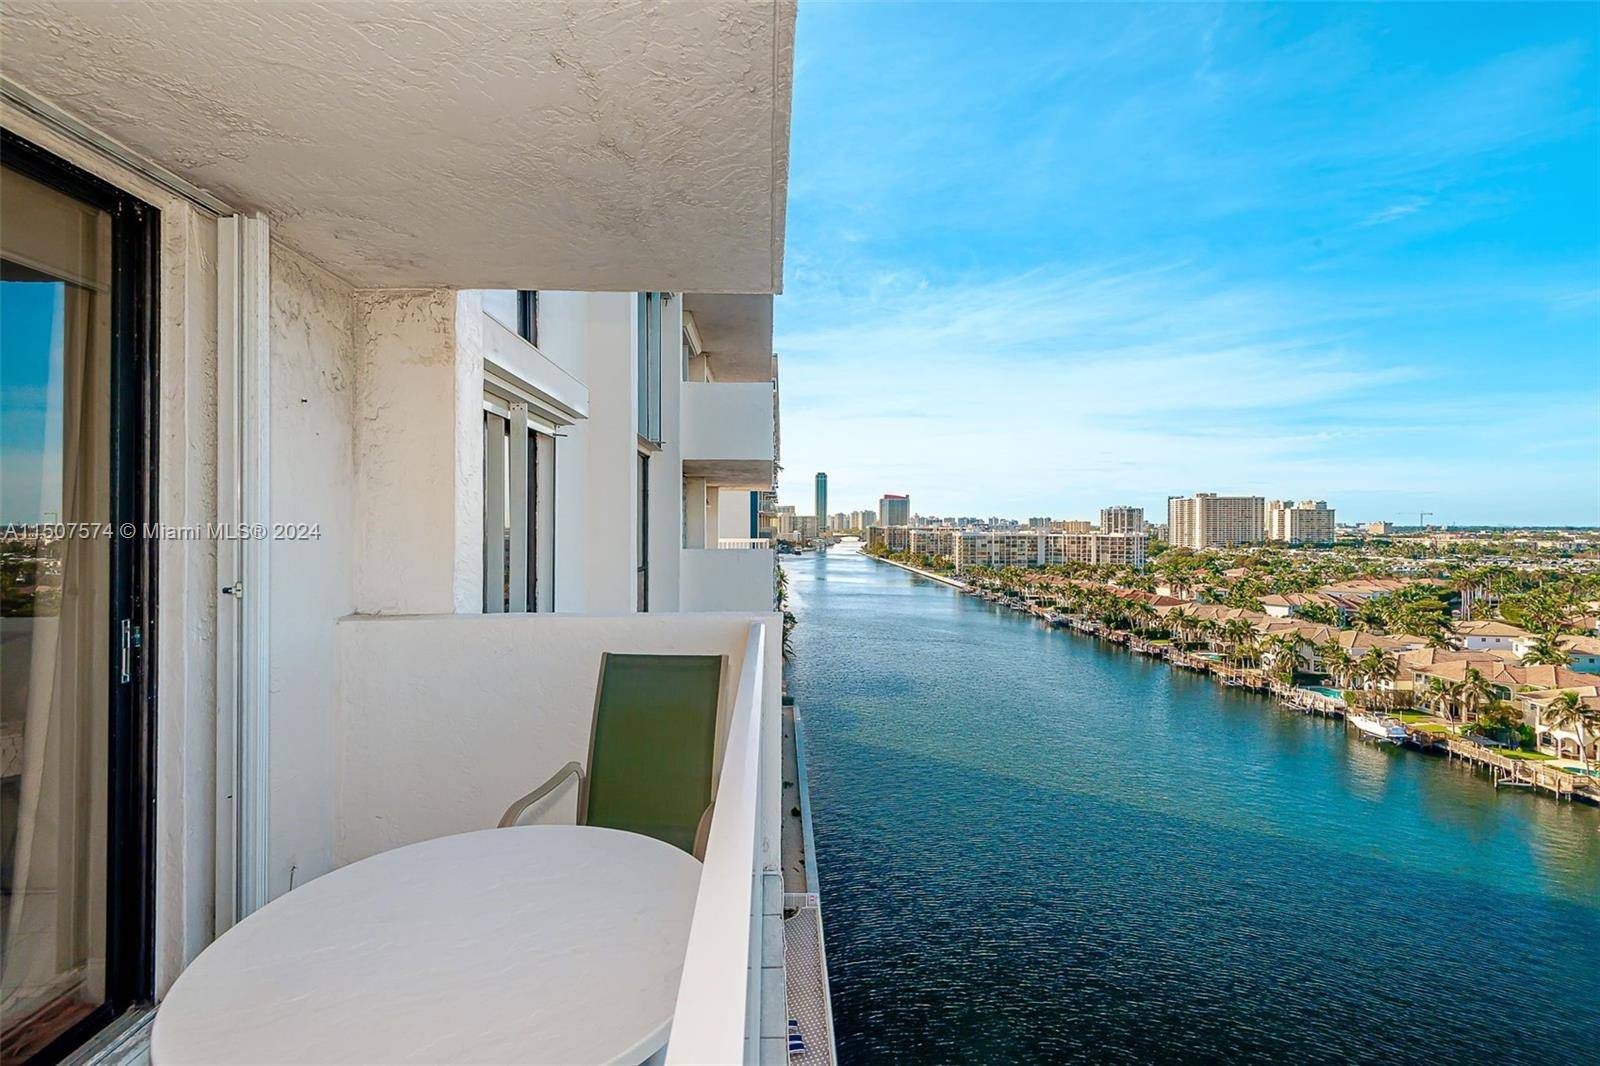 SPECTACULAR ENDLESS VIEWS OF THE INTRACOASTAL WATERWAY AND CITY ON THIS HIGH FLOOR WELL MAINTAINED AND TAKEN CARED OF UNIT.